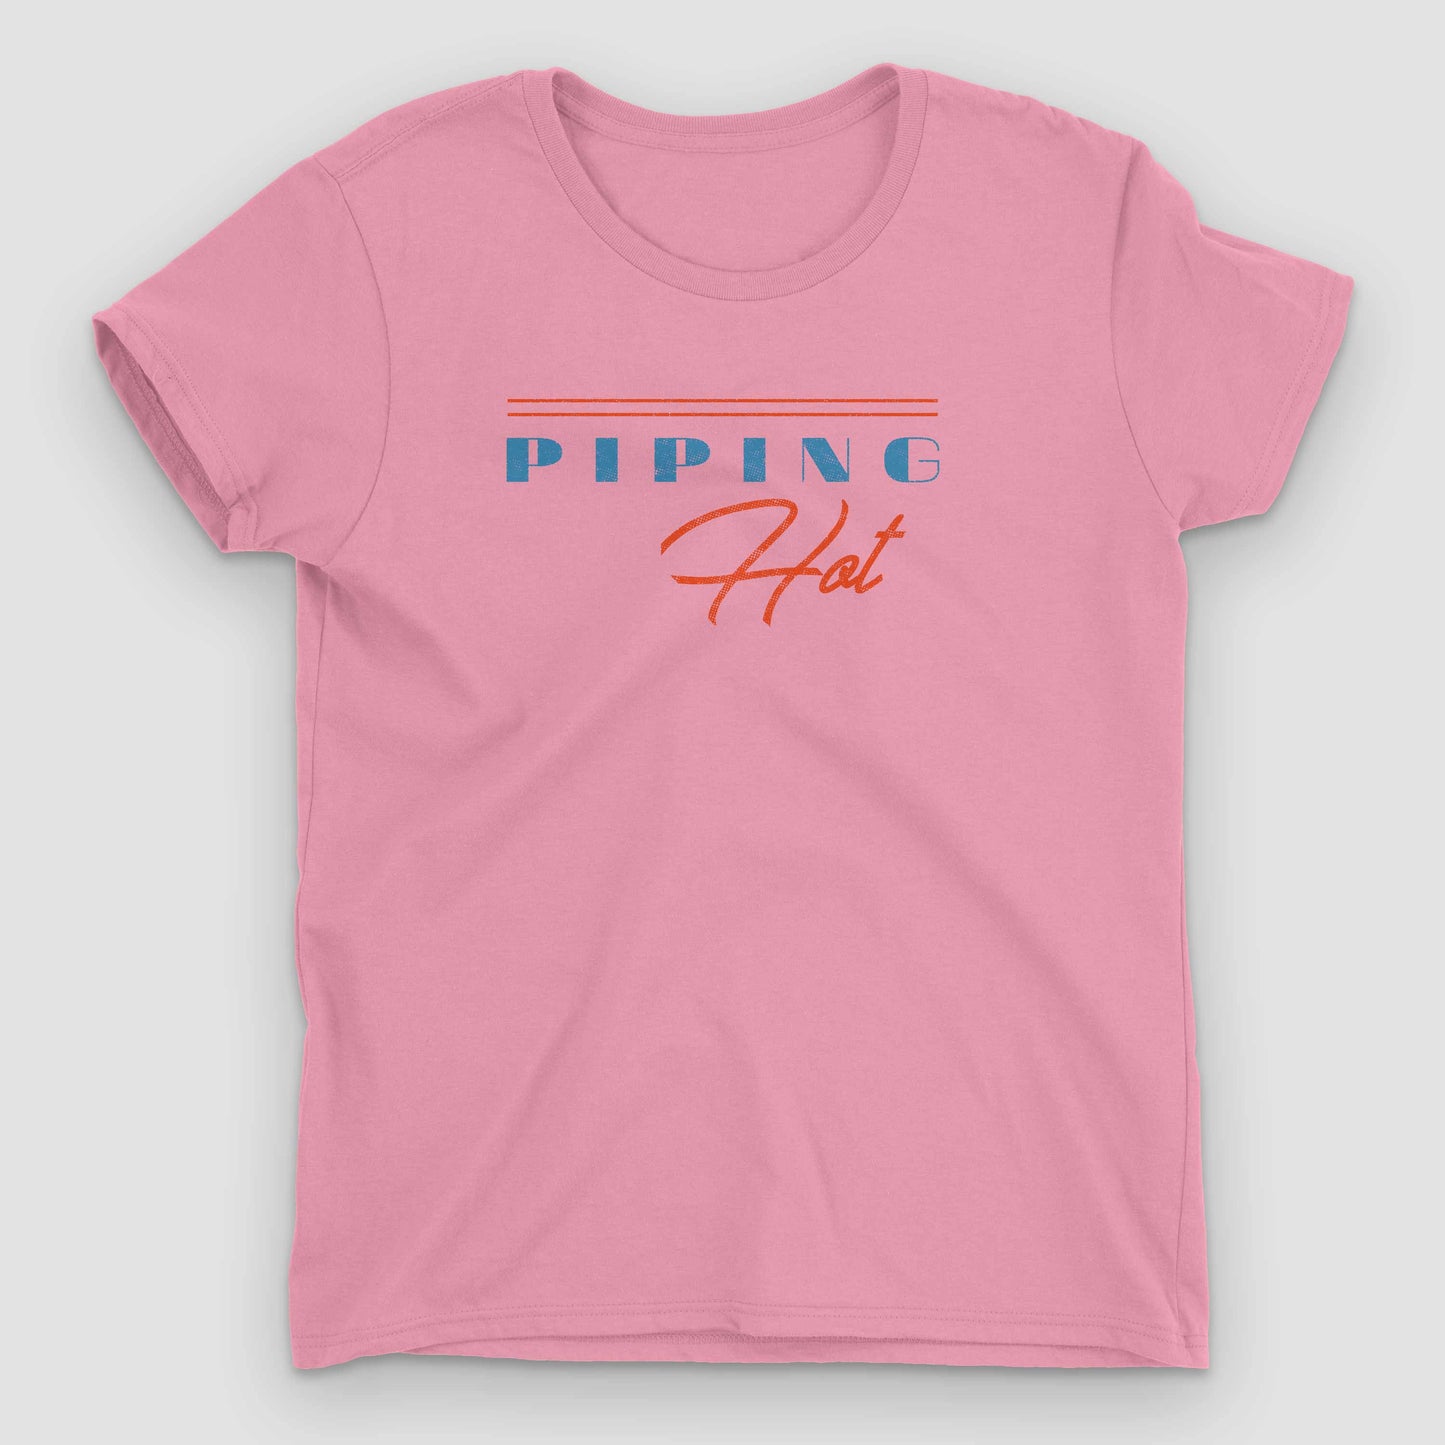 Pink and Red Streamers Graphic T-Shirt for Sale by